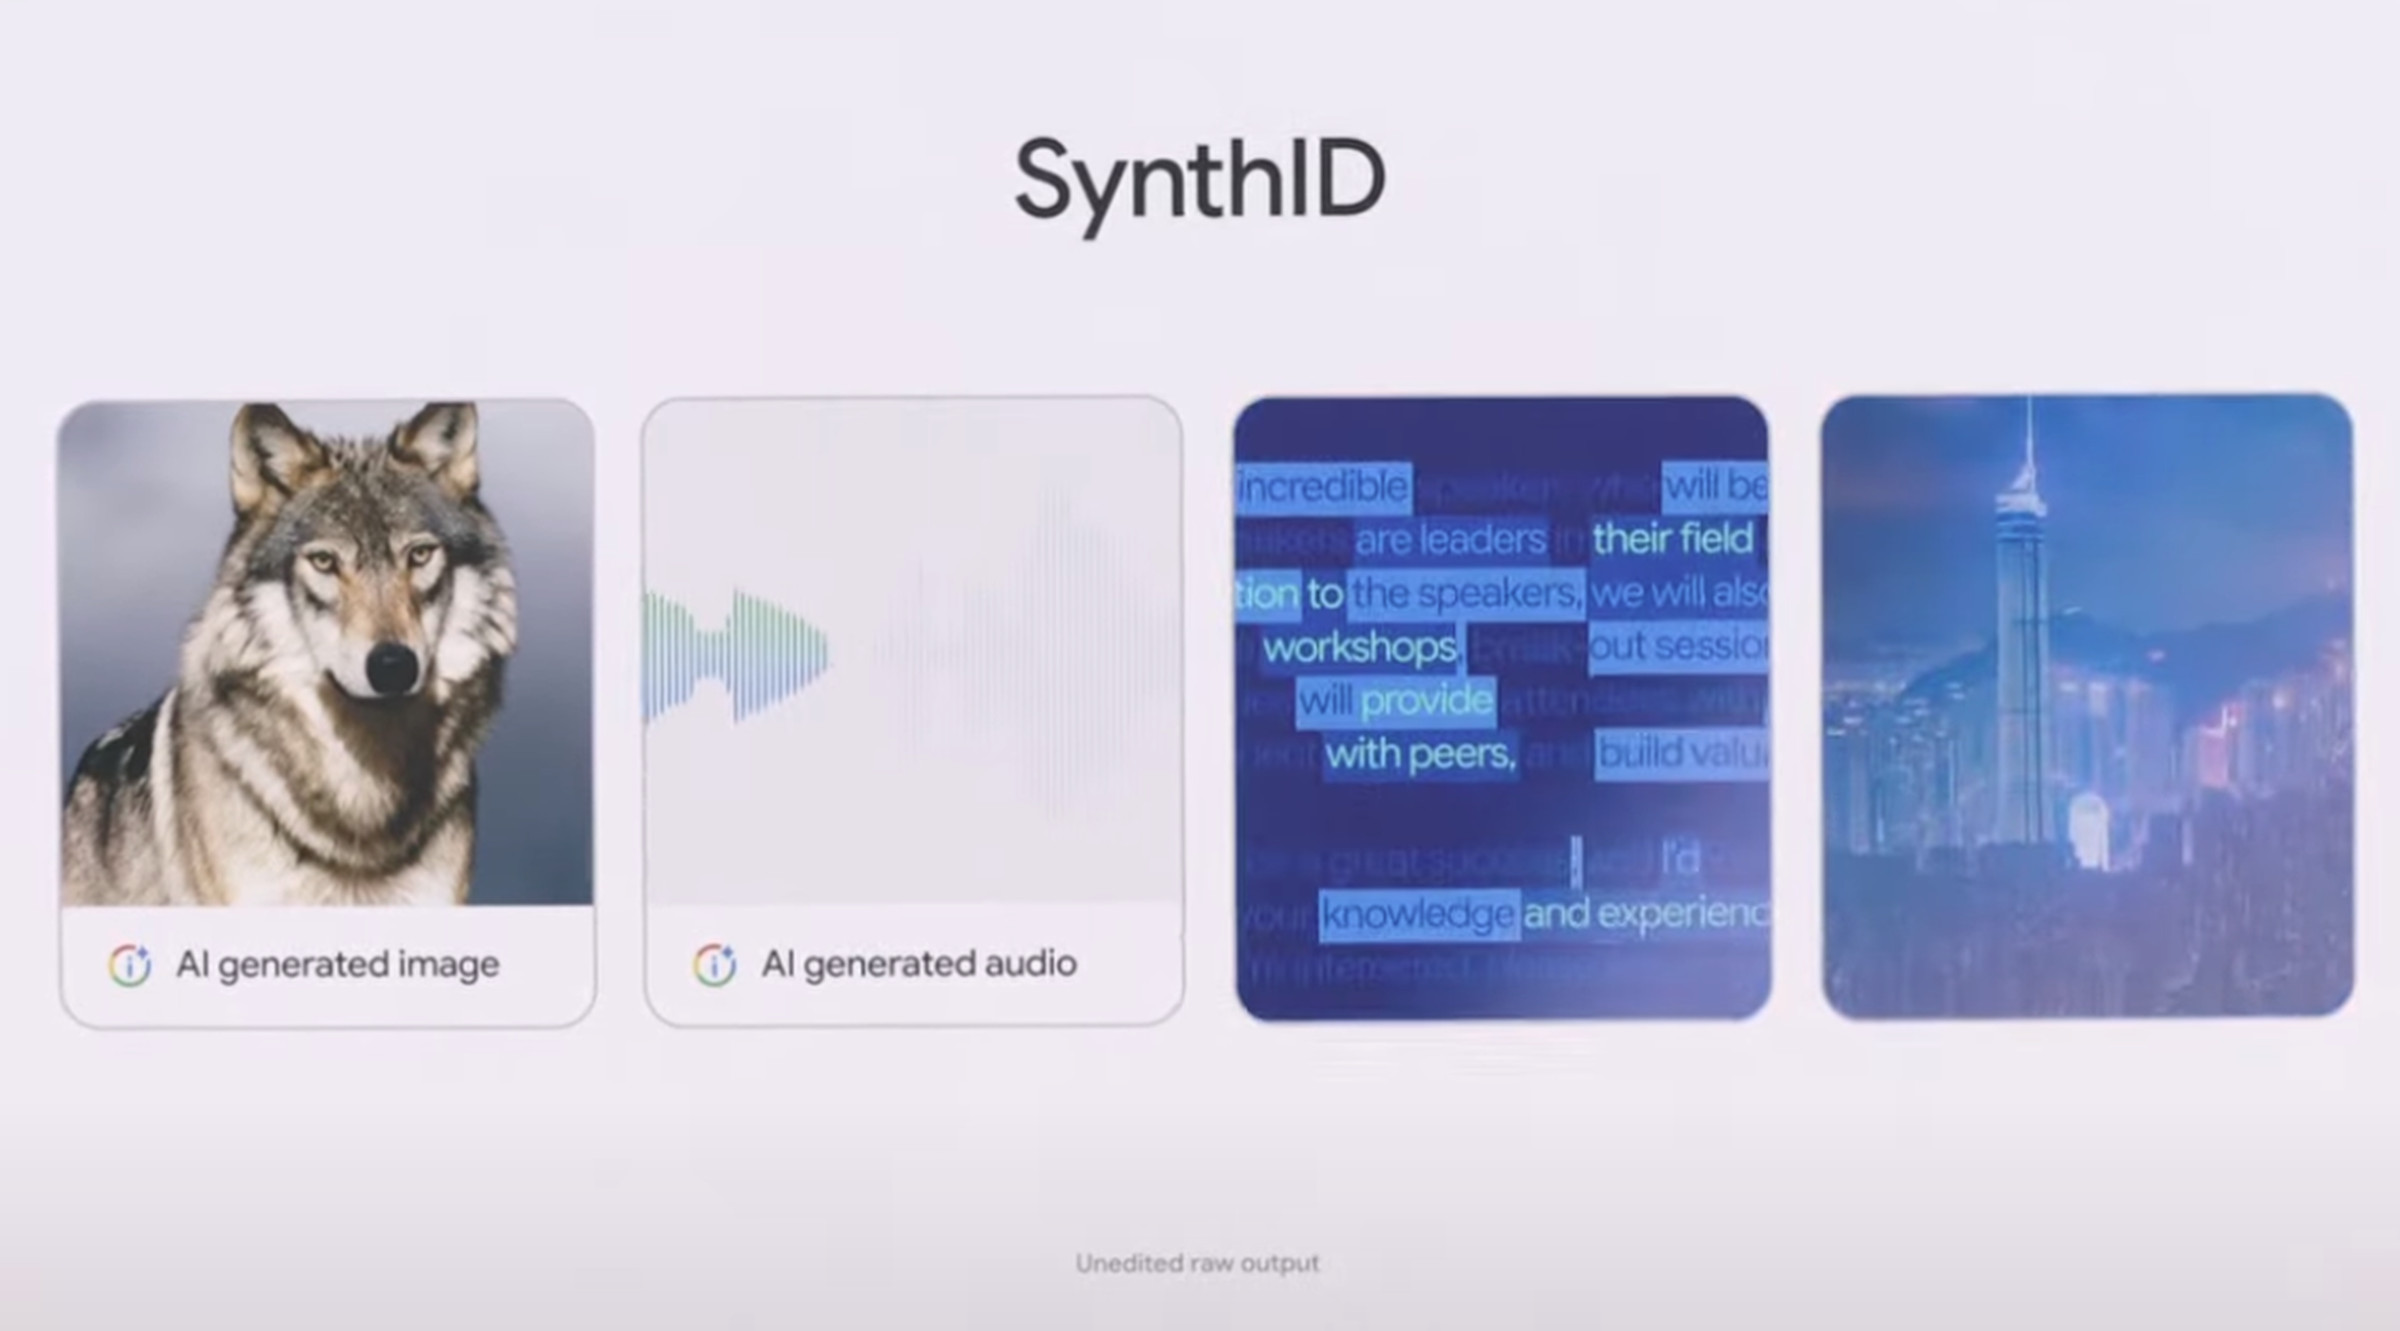 Screenshot showing four images under the word “SynthID”